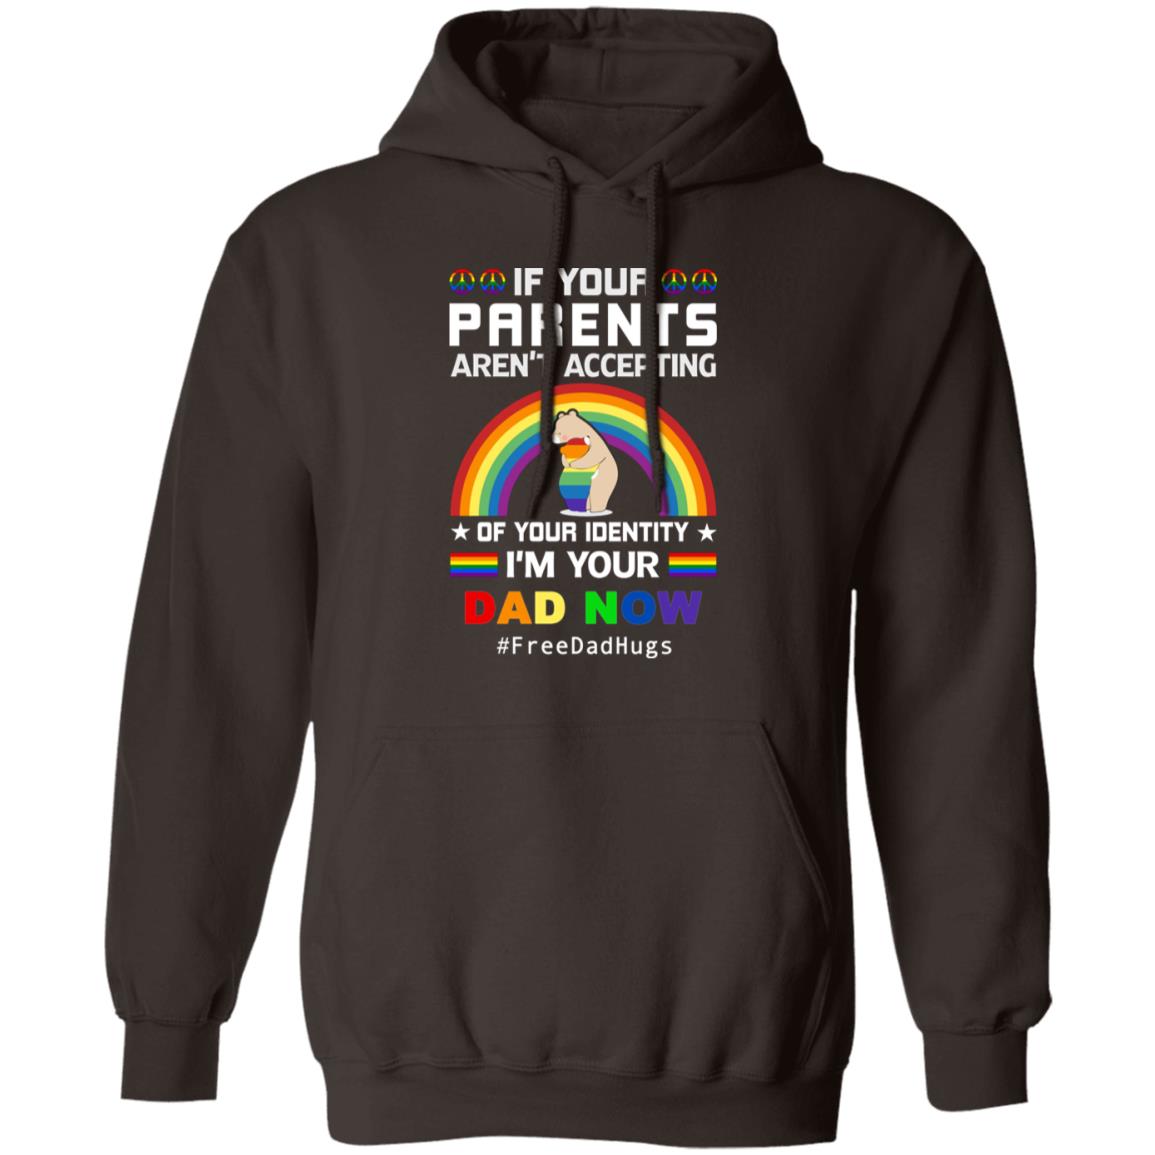 I'm your Dad Now - T shirt & Hoodie